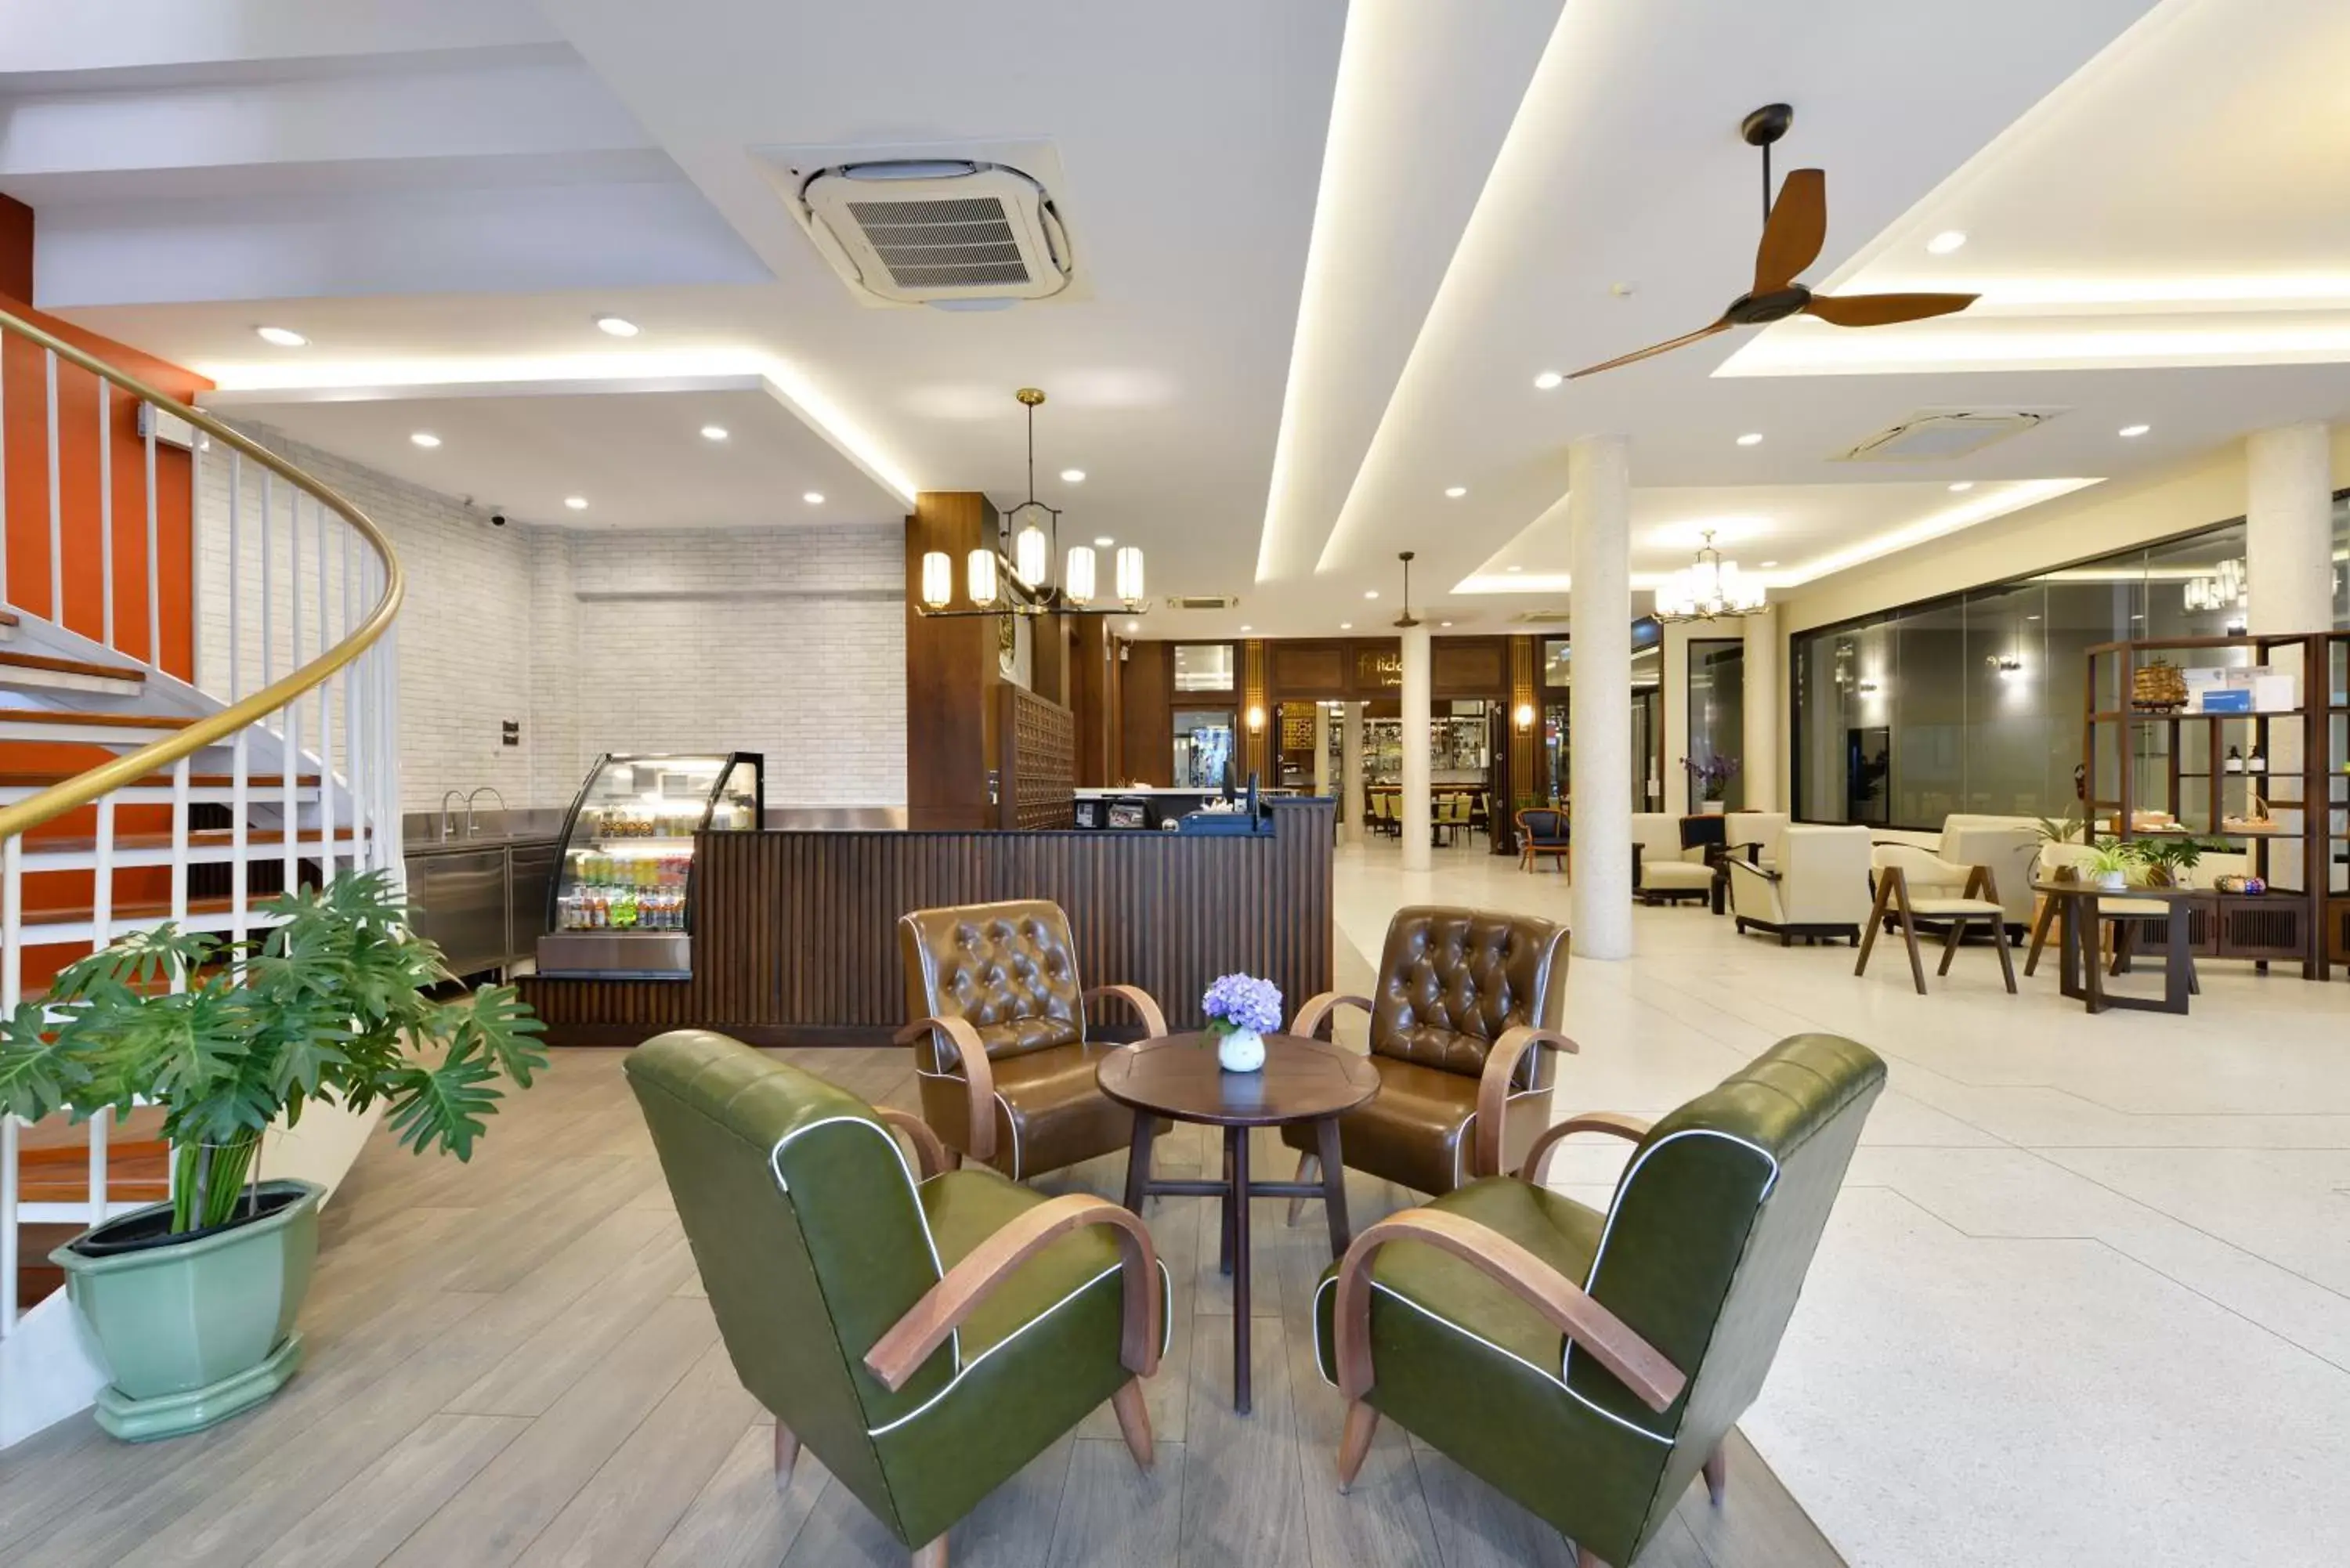 Lobby or reception in Oldthaiheng Hotel